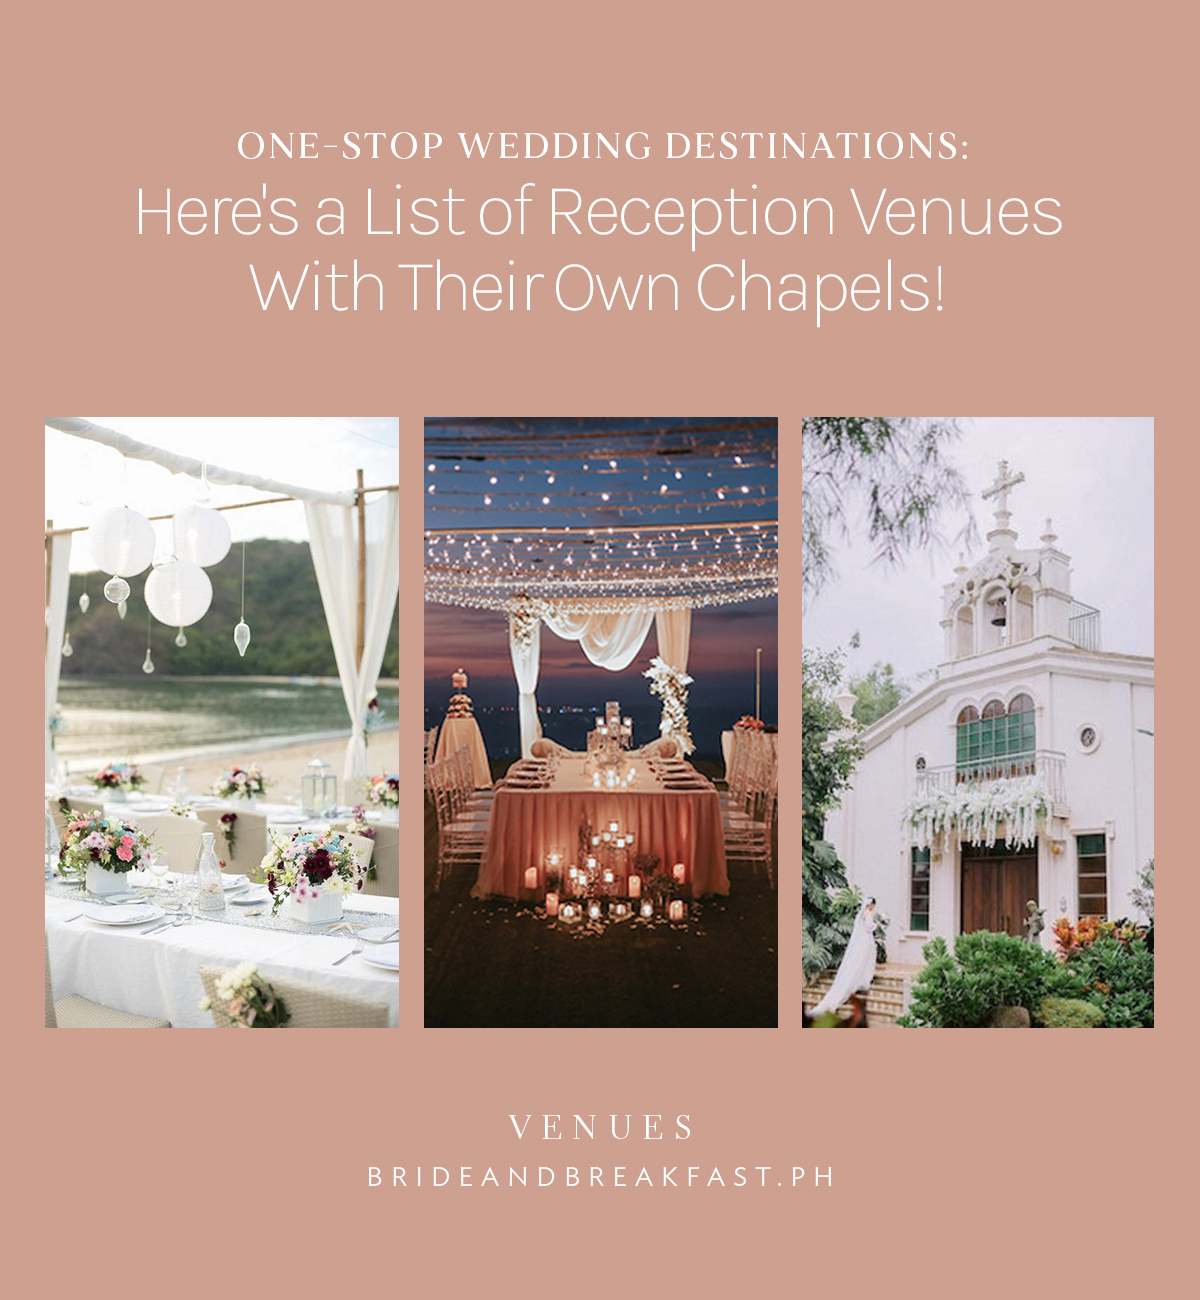 One-Stop Wedding Destinations: Here's a List of Reception Venues With Their Own Chapels!